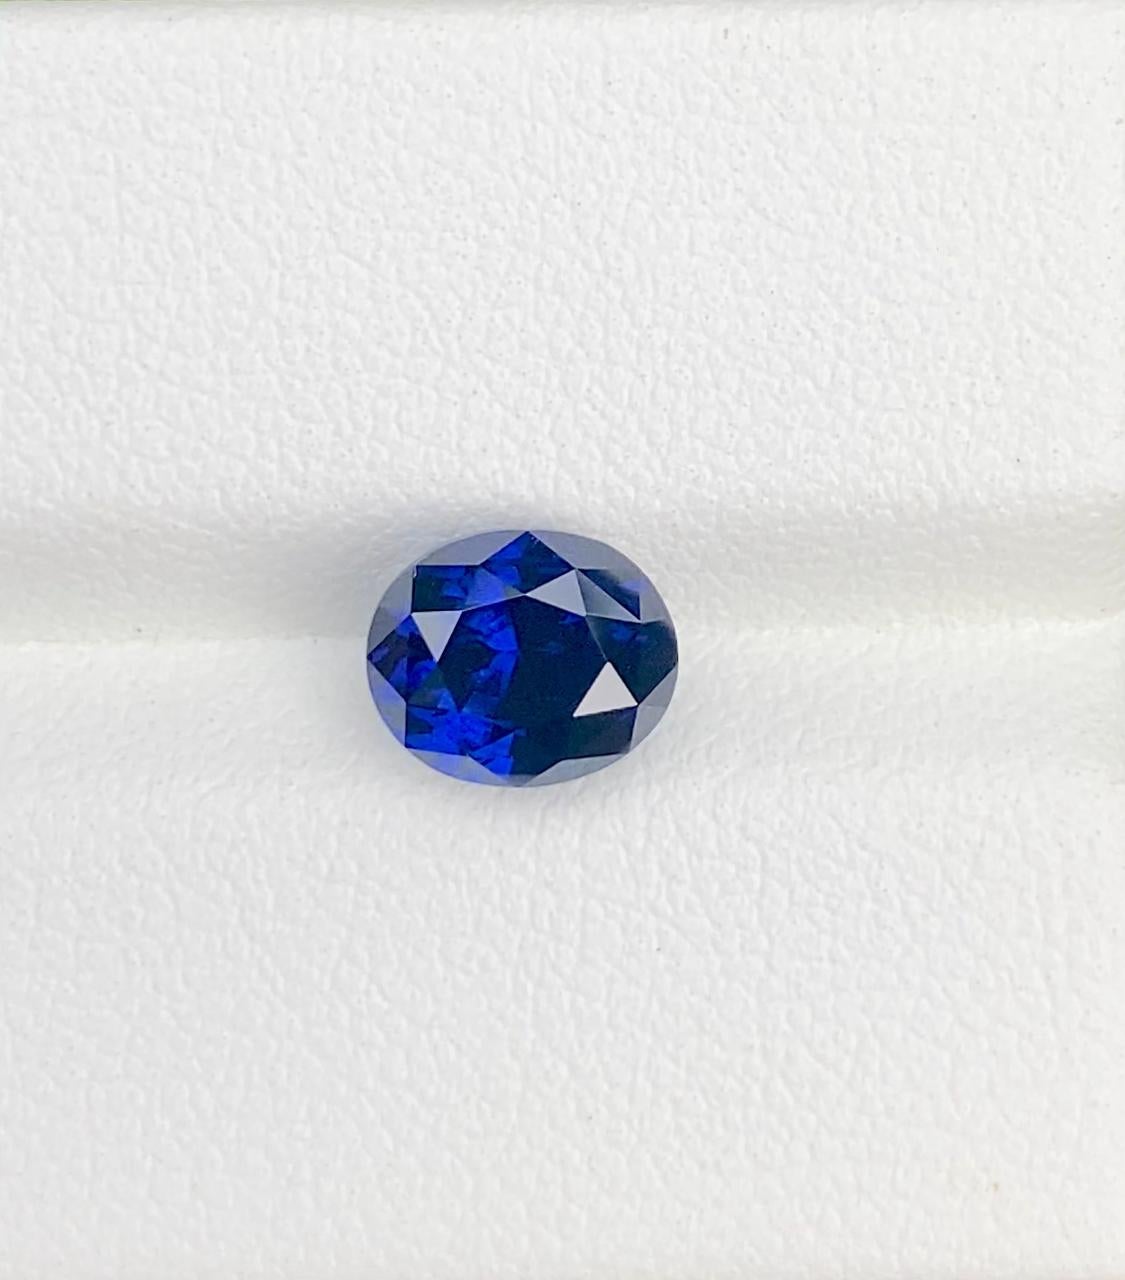 Presenting the Internally Flawless Beautiful Ceylon Royal Blue Sapphire, weighing 2.70 carats. This exquisite gemstone boasts a captivating royal blue color that exudes elegance and sophistication. With its flawless clarity and perfect cut, it